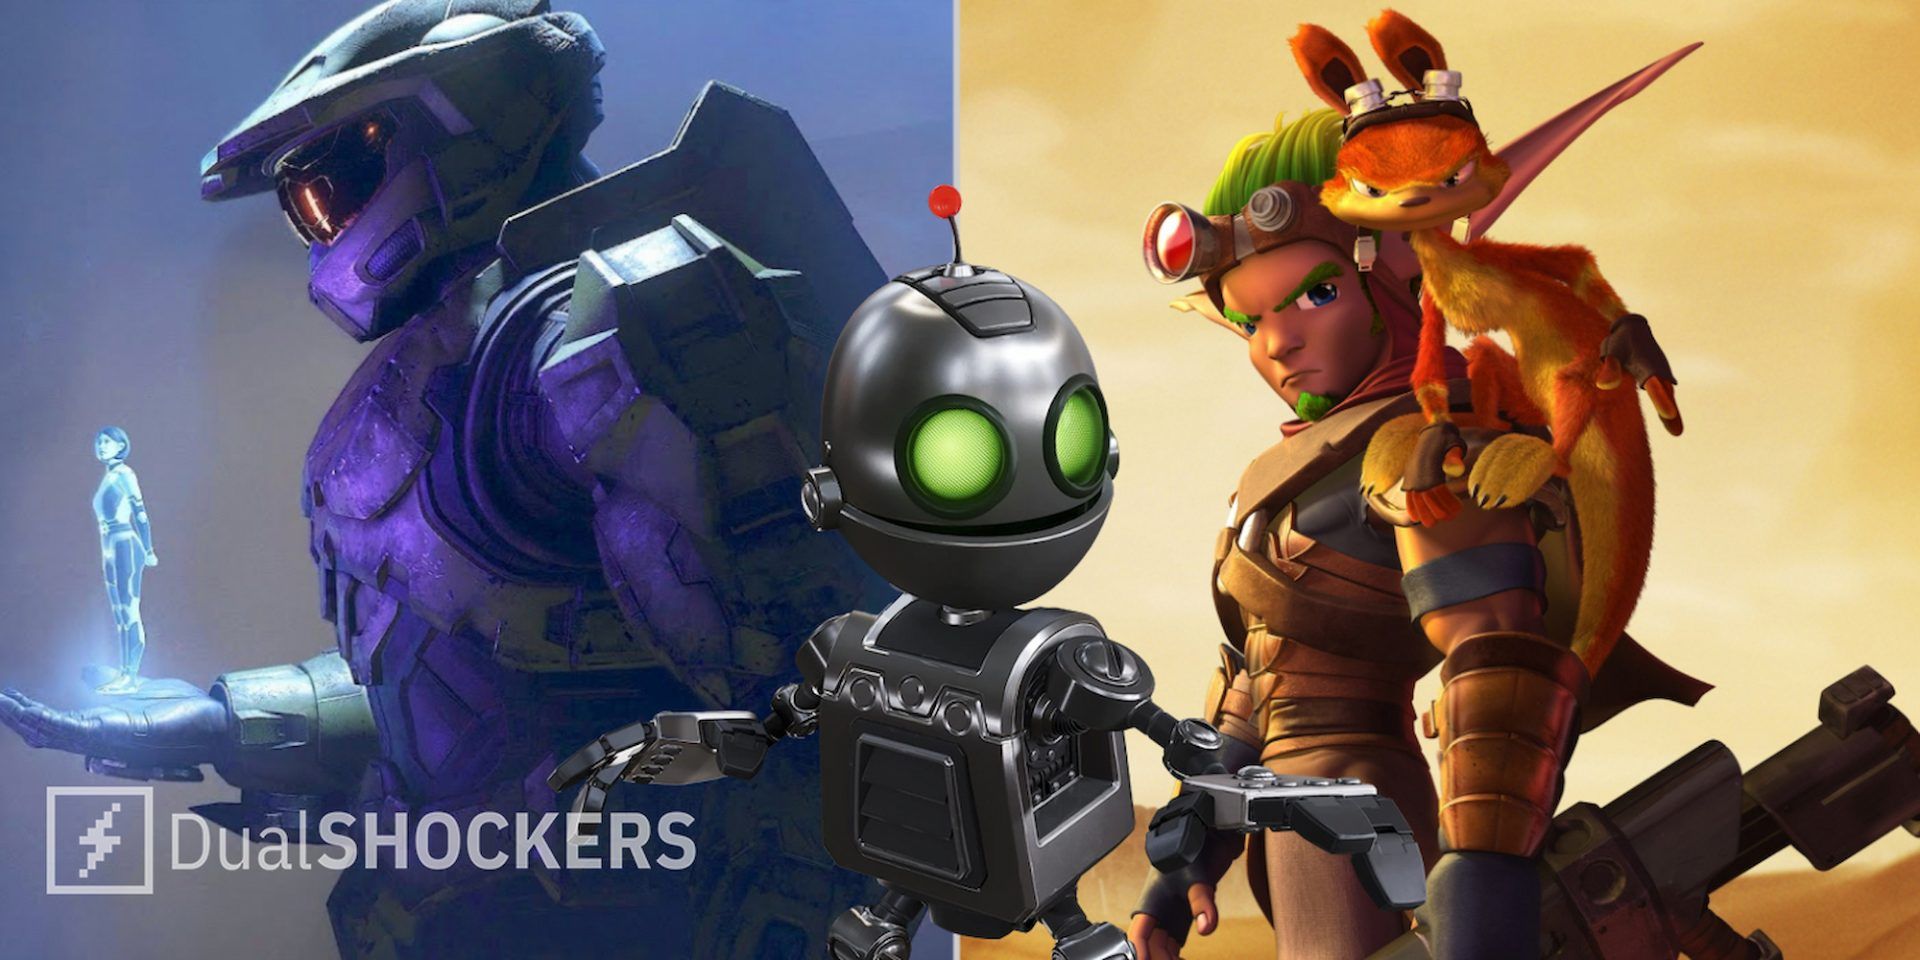 Master Chief and the Weapon, Clank from Ratchet and Clank, and Jak and Daxter side by side.